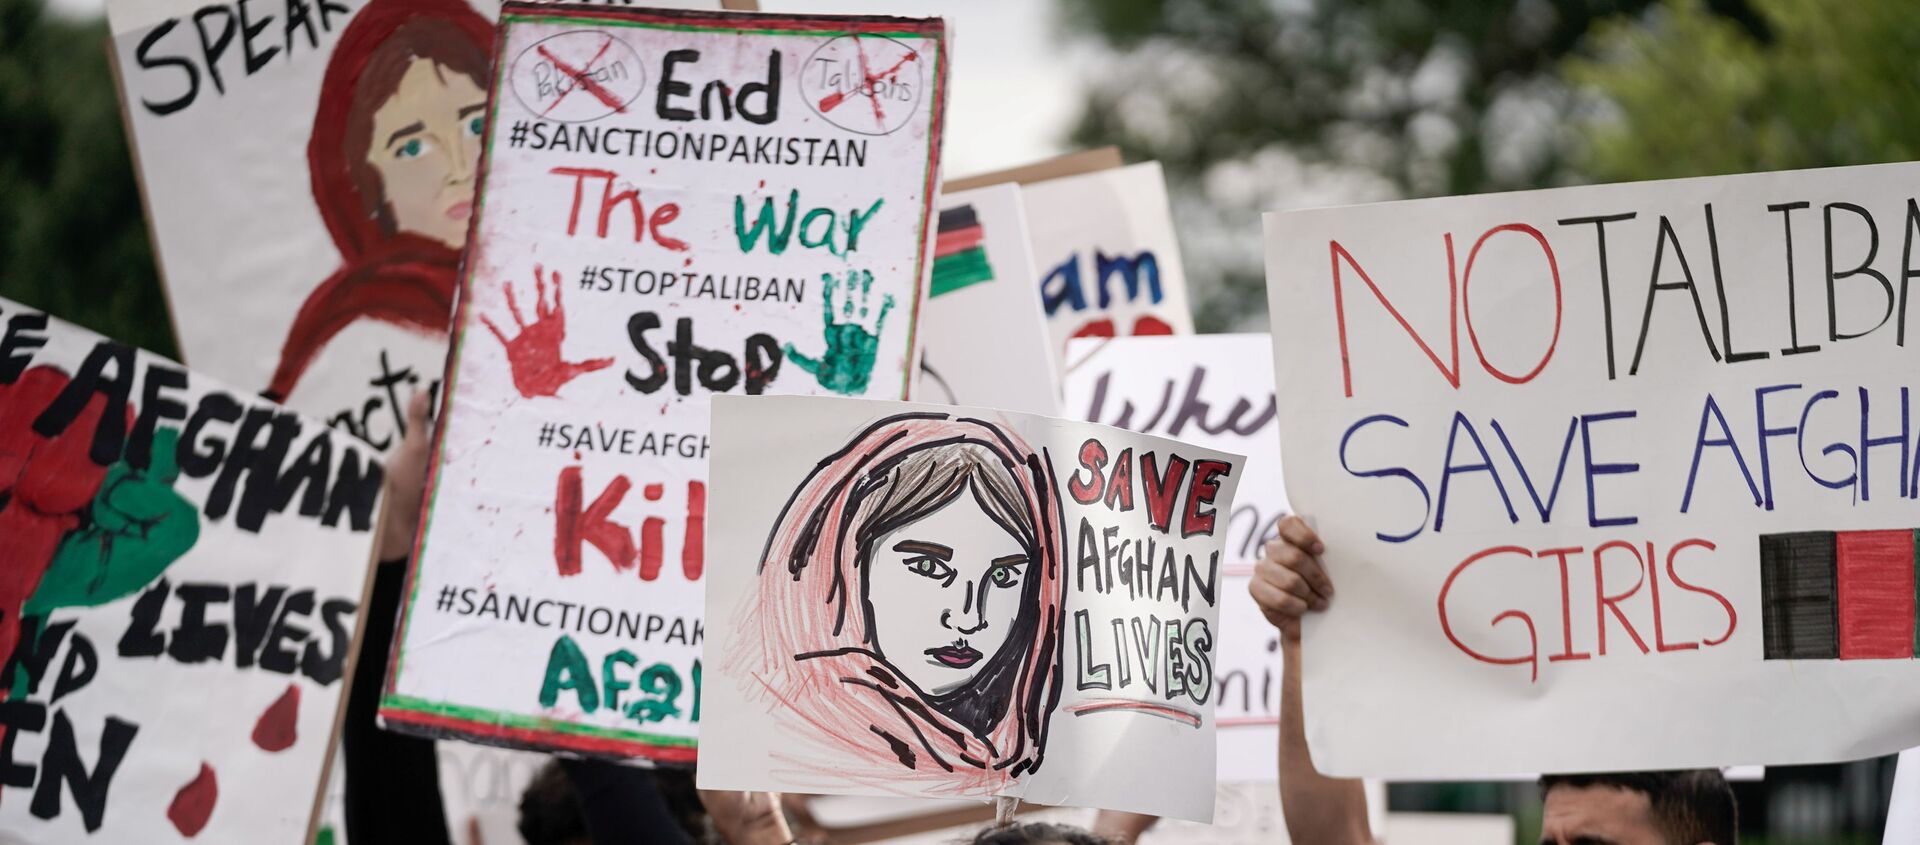 Demonstrators shout Peace in Afghanistan and hold up signs as they gather in front of the White House in Washington, U.S., August 15, 2021 on the day Taliban insurgents entered Afghanistan's capital Kabul - Sputnik International, 1920, 15.08.2021